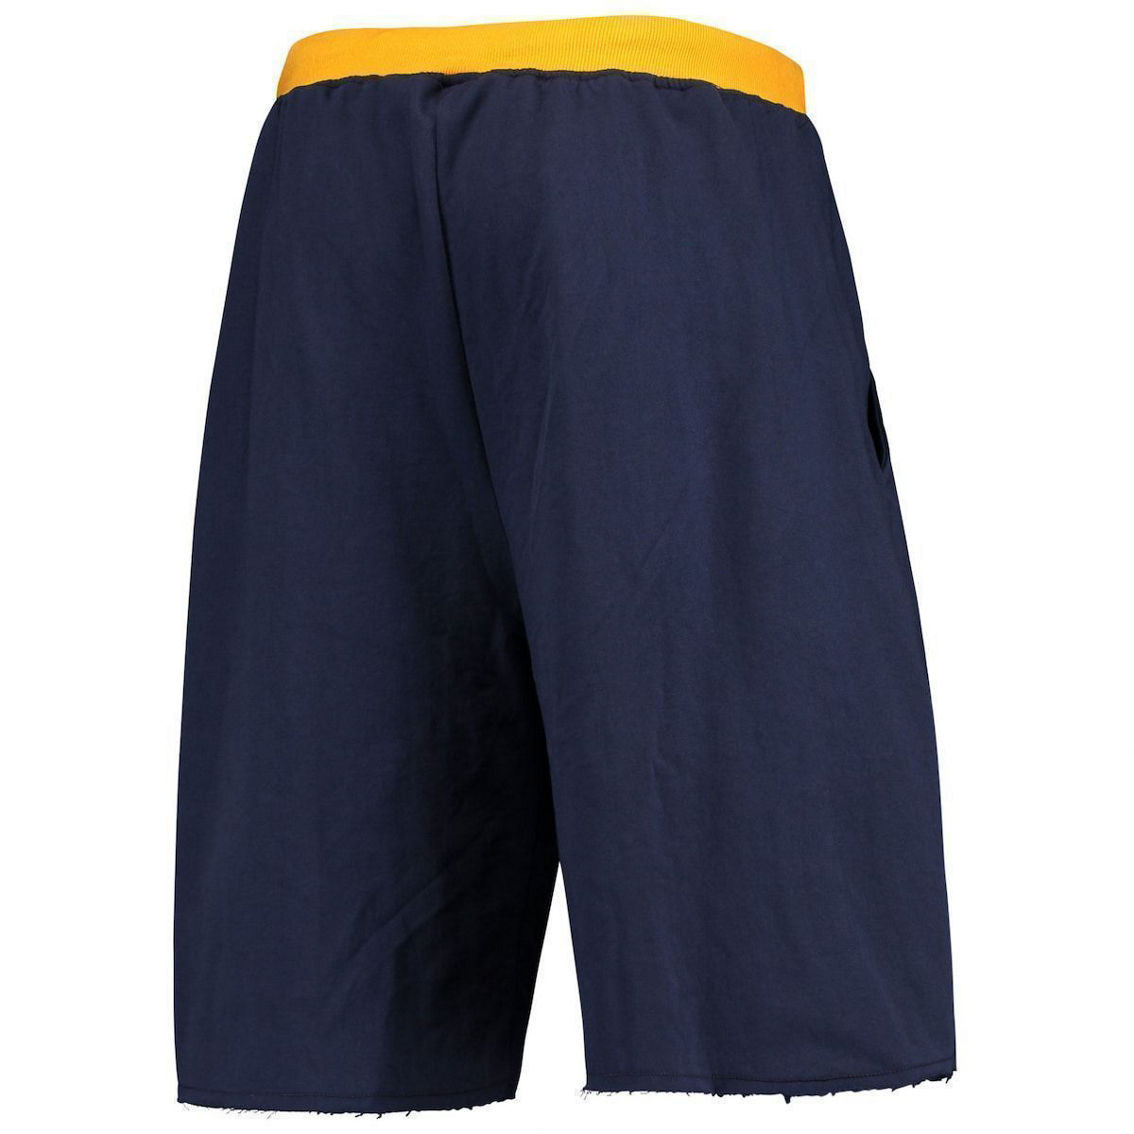 Profile Men's Jamal Murray Navy Denver Nuggets Big & Tall French Terry Name & Number Shorts - Image 4 of 4